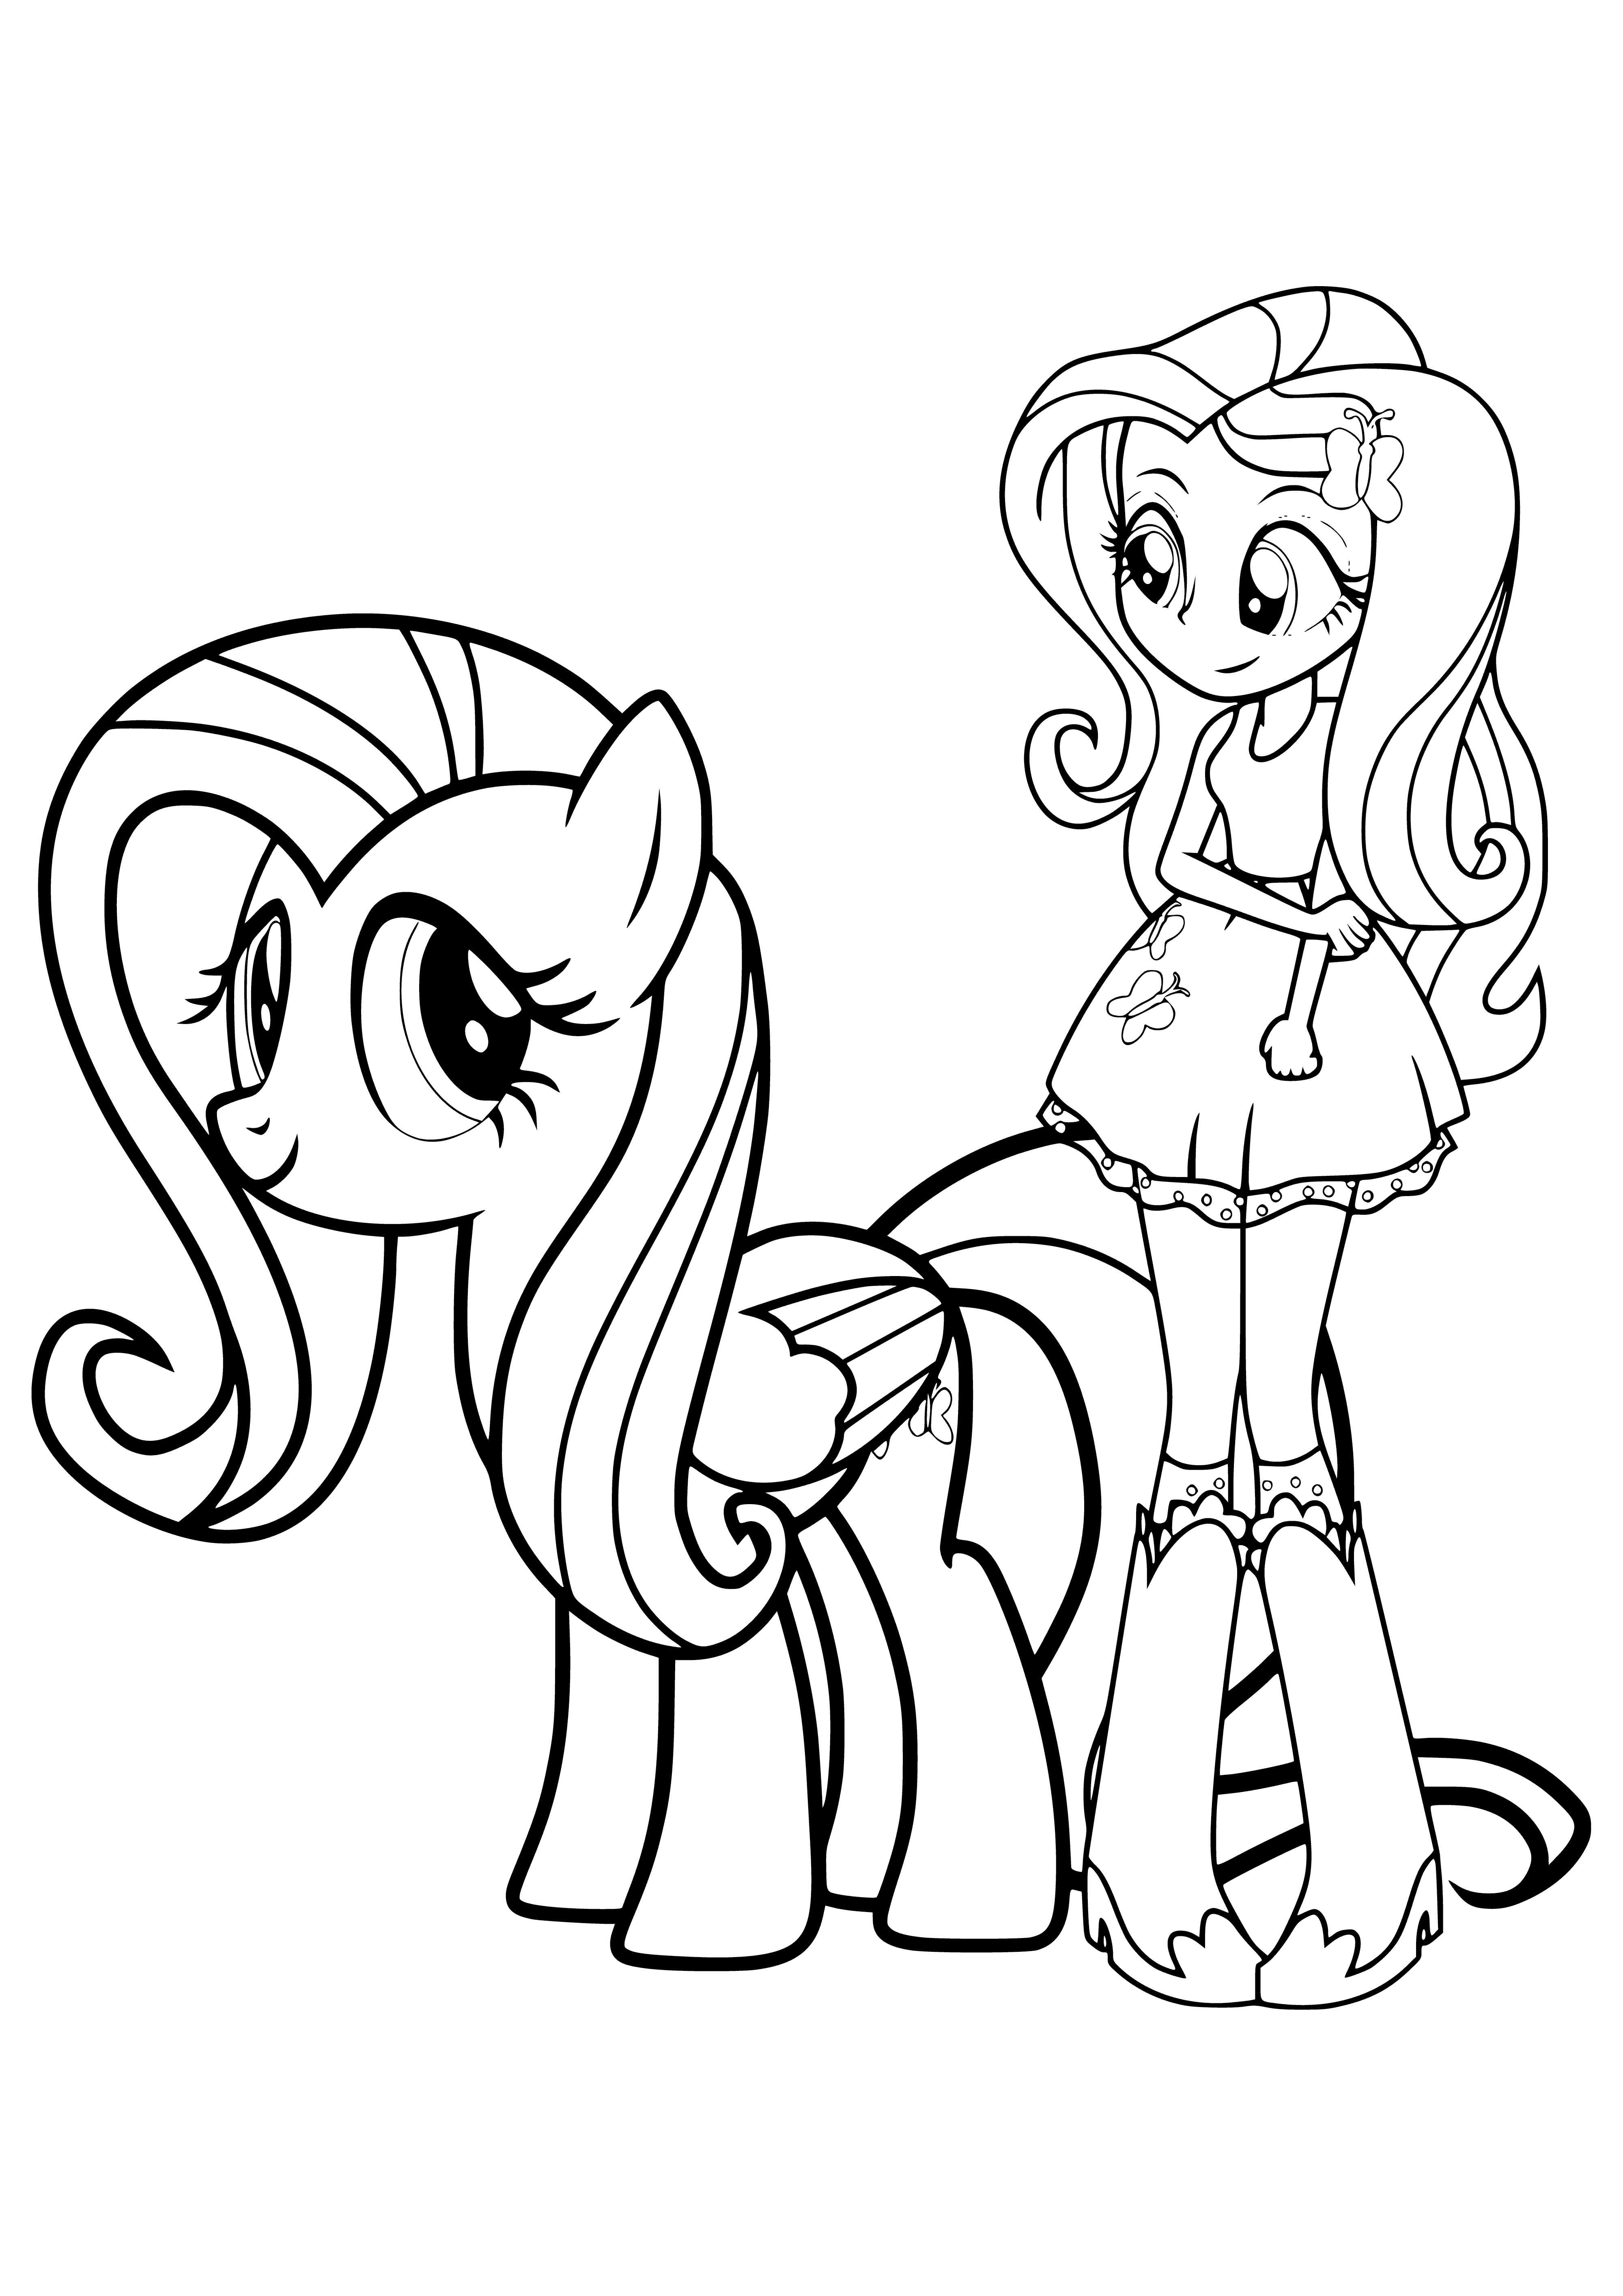 Girl Fluttershy has long pink hair, light pink outfit & white shoes. Her pony counterpart has a light pink mane, tail, blue eyes & yellow-pink butterfly. Both Fluttershy's share a gentle, caring nature. #Fluttershy #girlpony #MyLittlePony